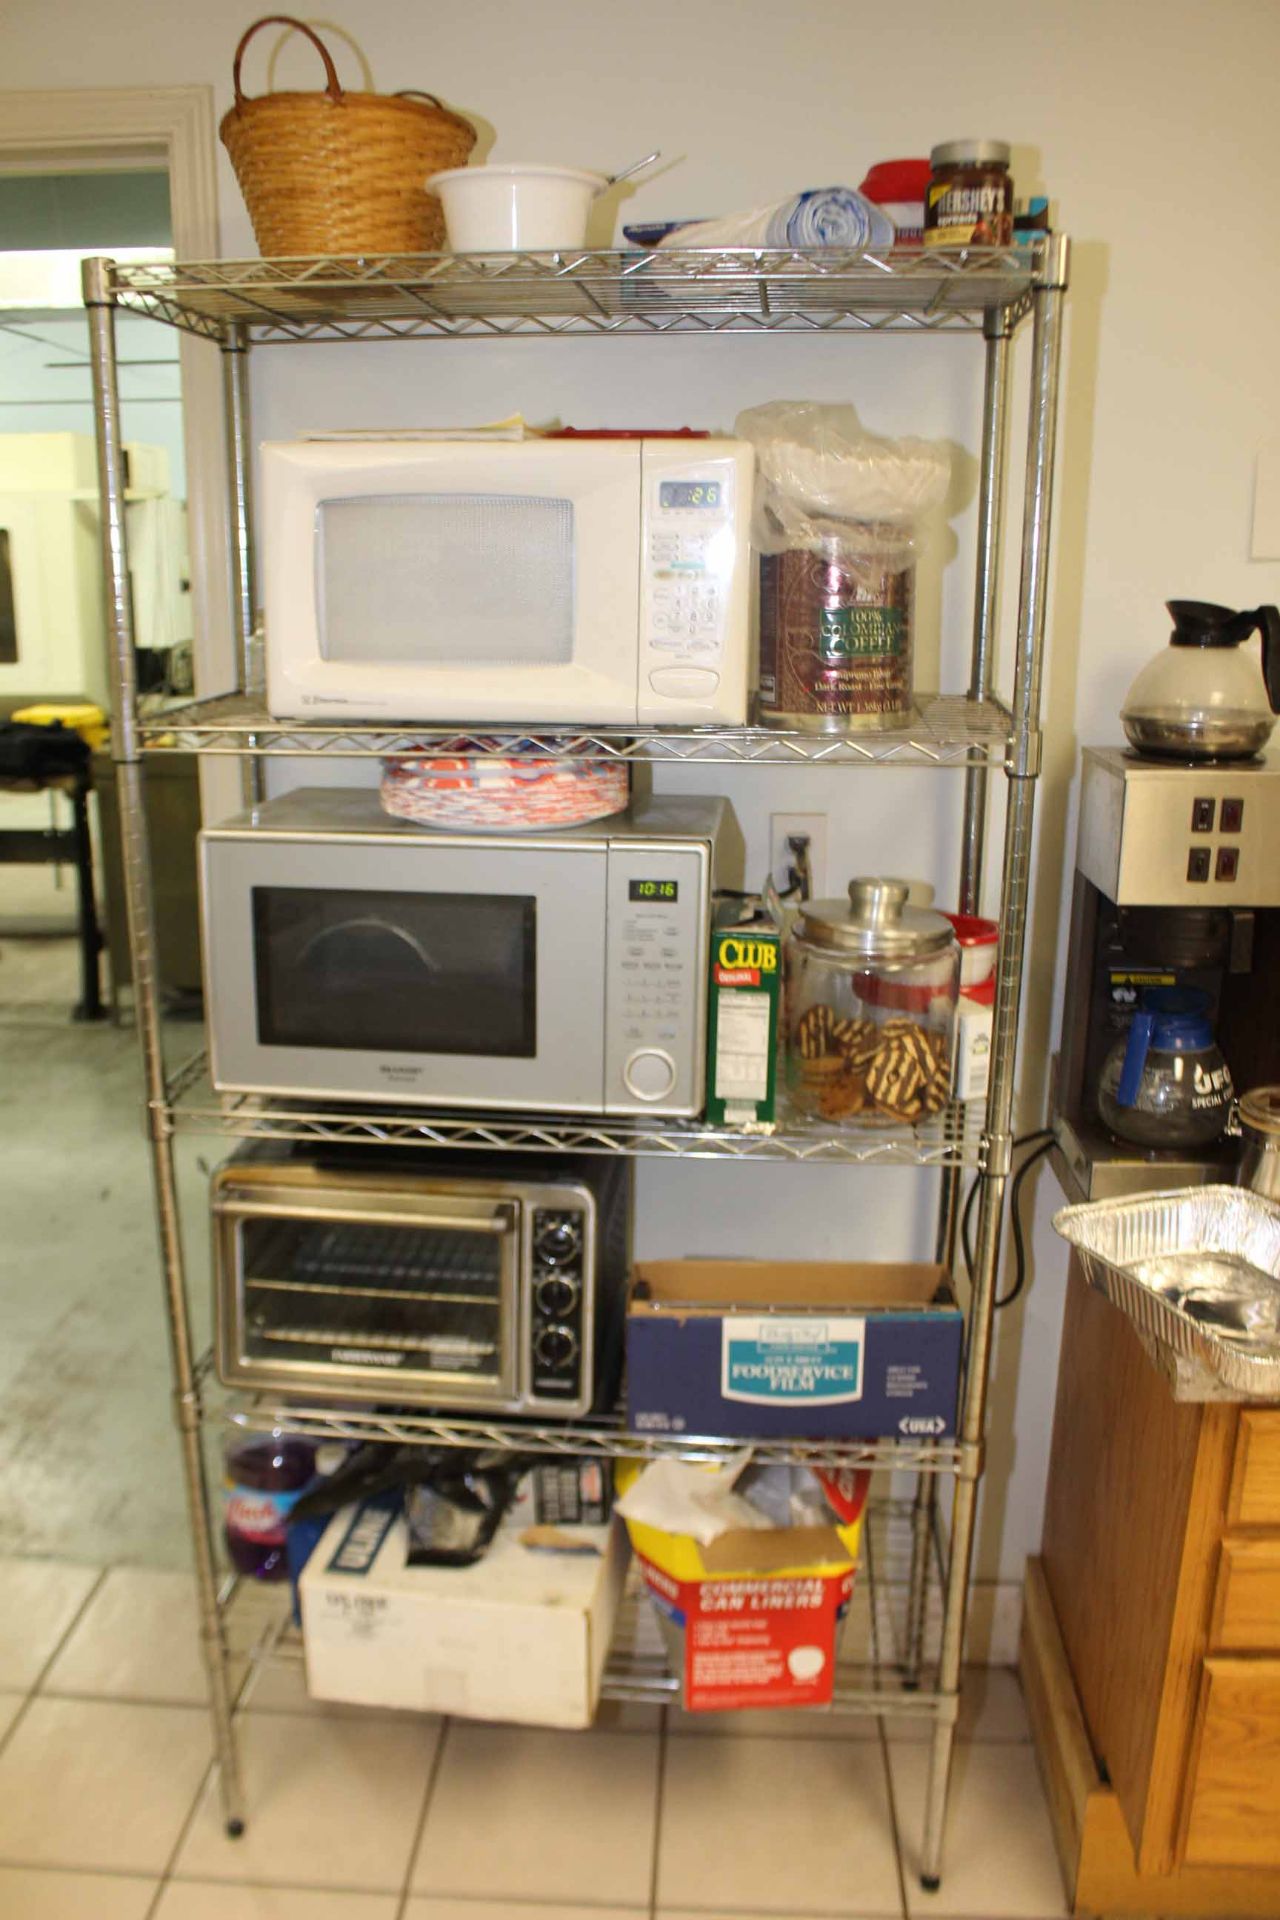 LOT CONTENTS OF KITCHEN: microwaves, tables, coffee maker, etc. - Image 2 of 3